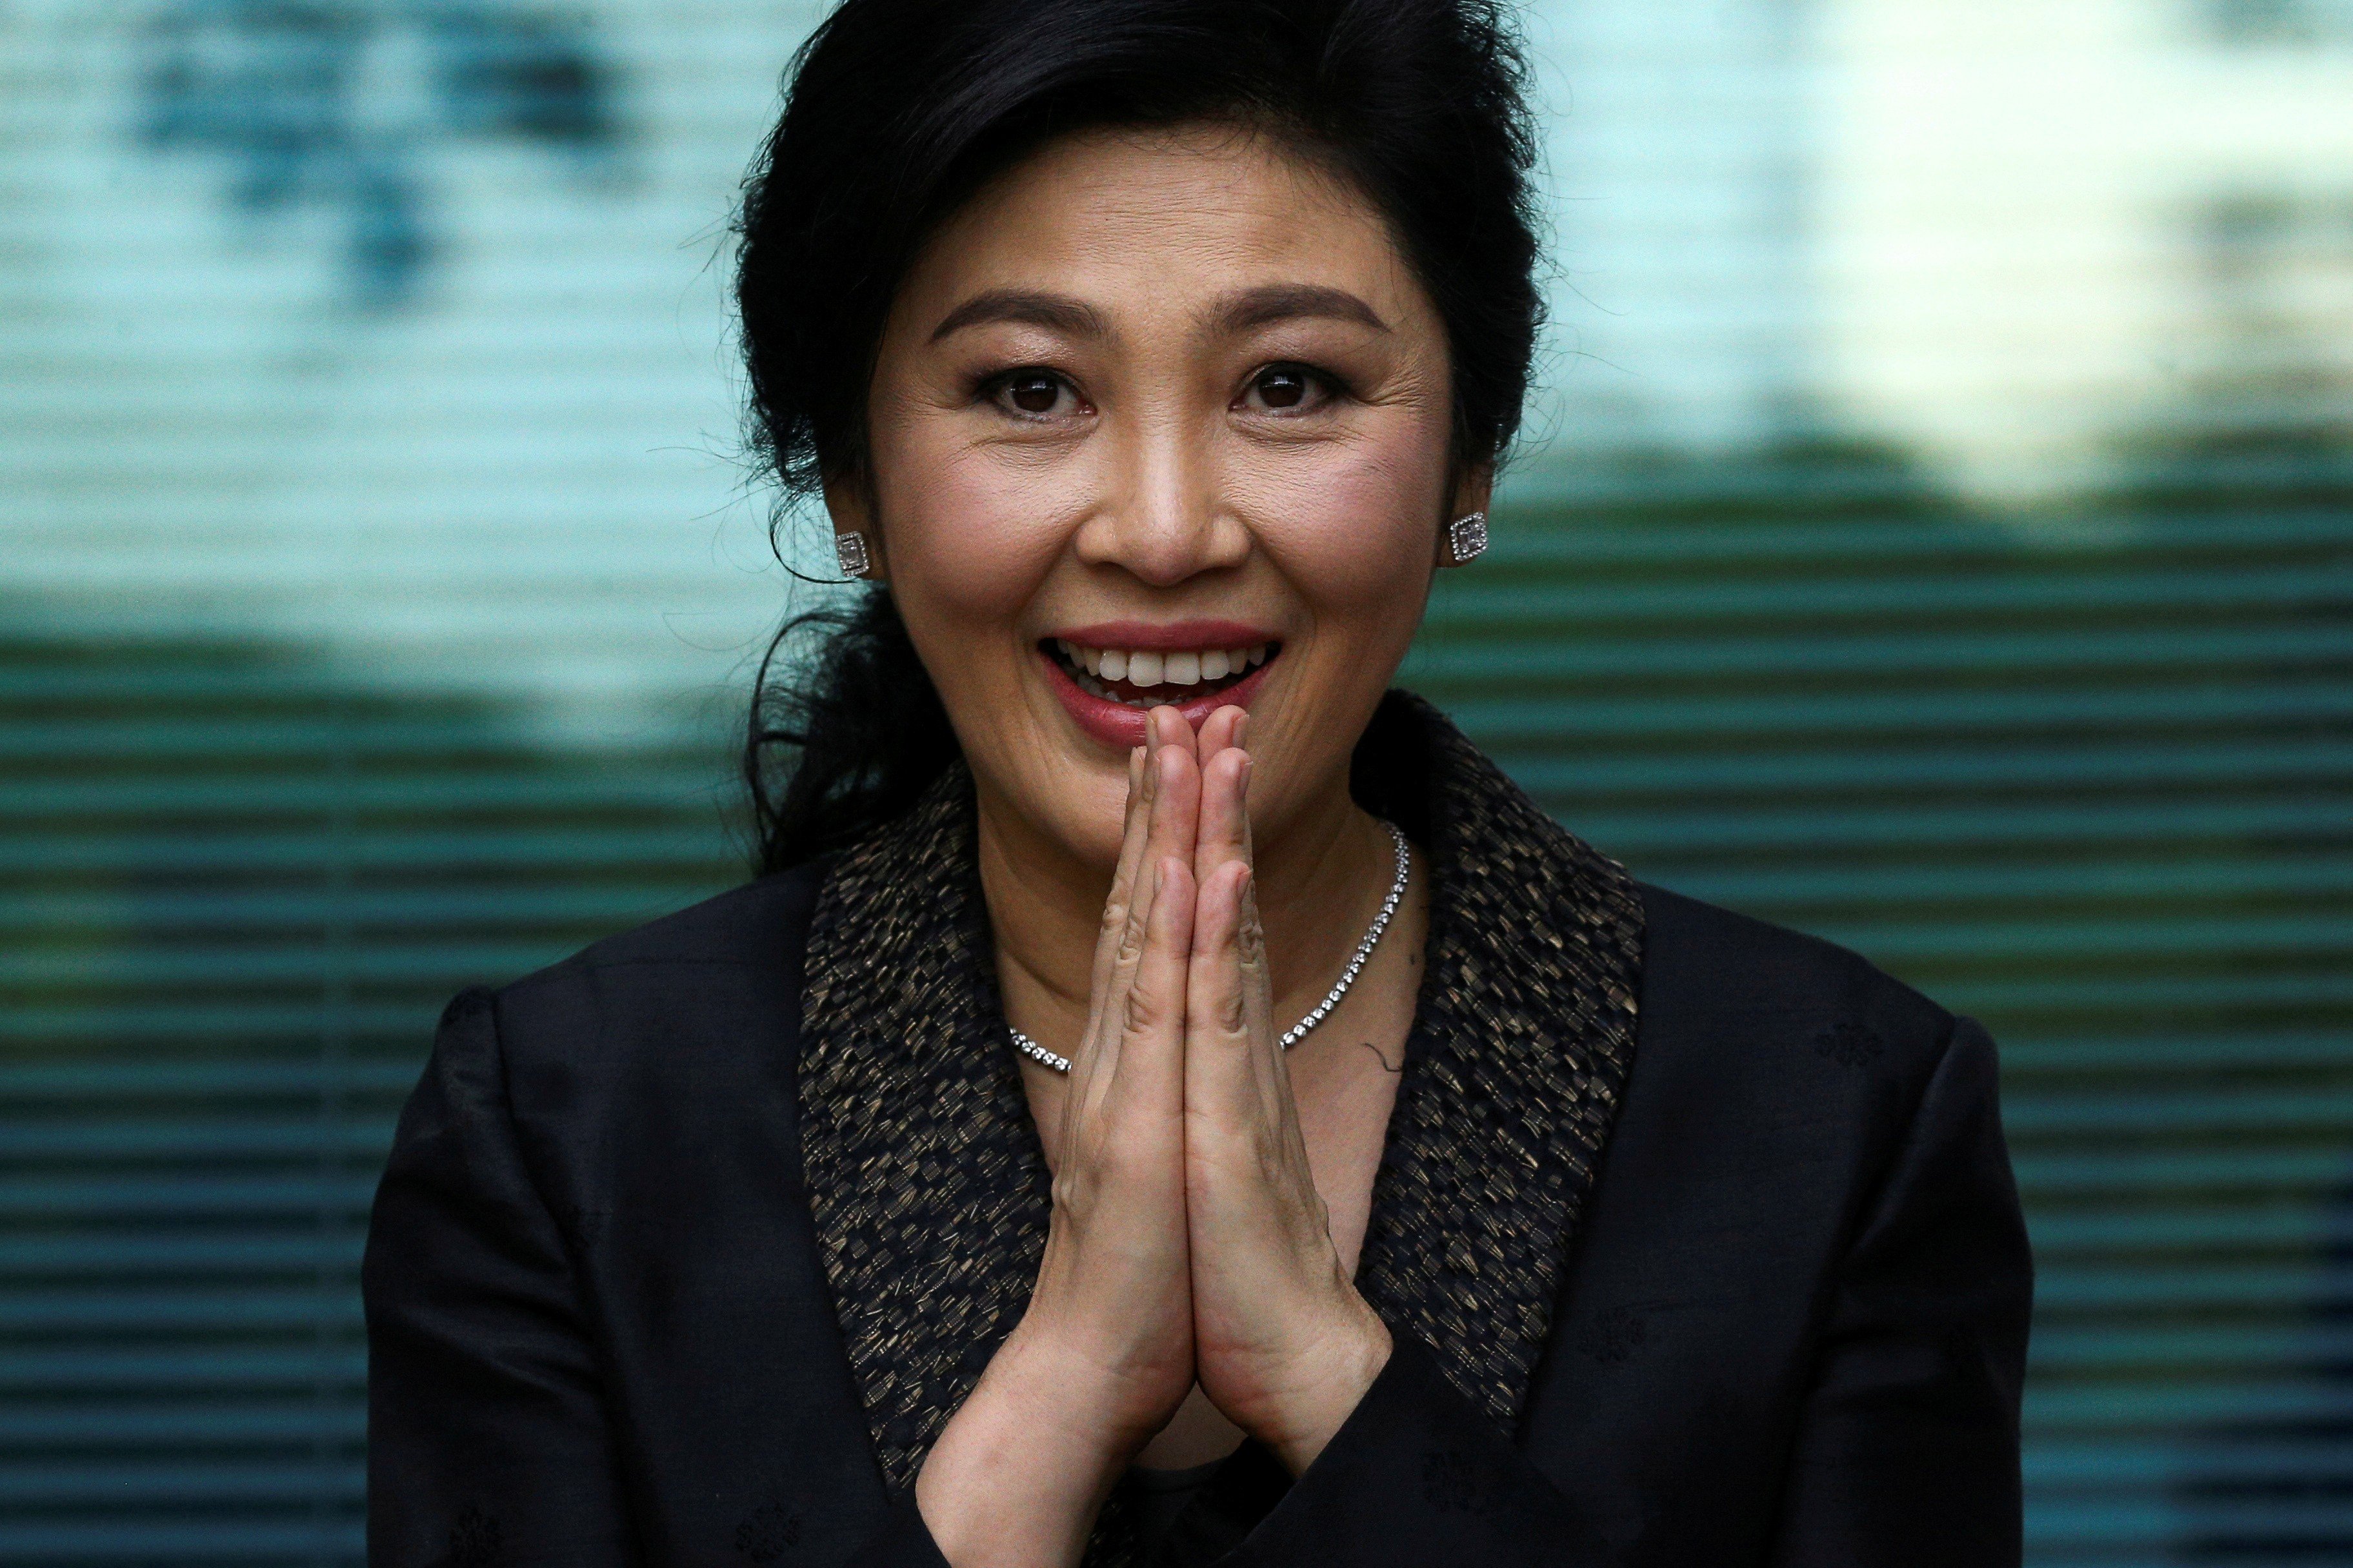 Former Thai prime minister Yingluck Shinawatra greets supporters as she arrives at the Supreme Court in Bangkok in August 2017. Photo: Reuters